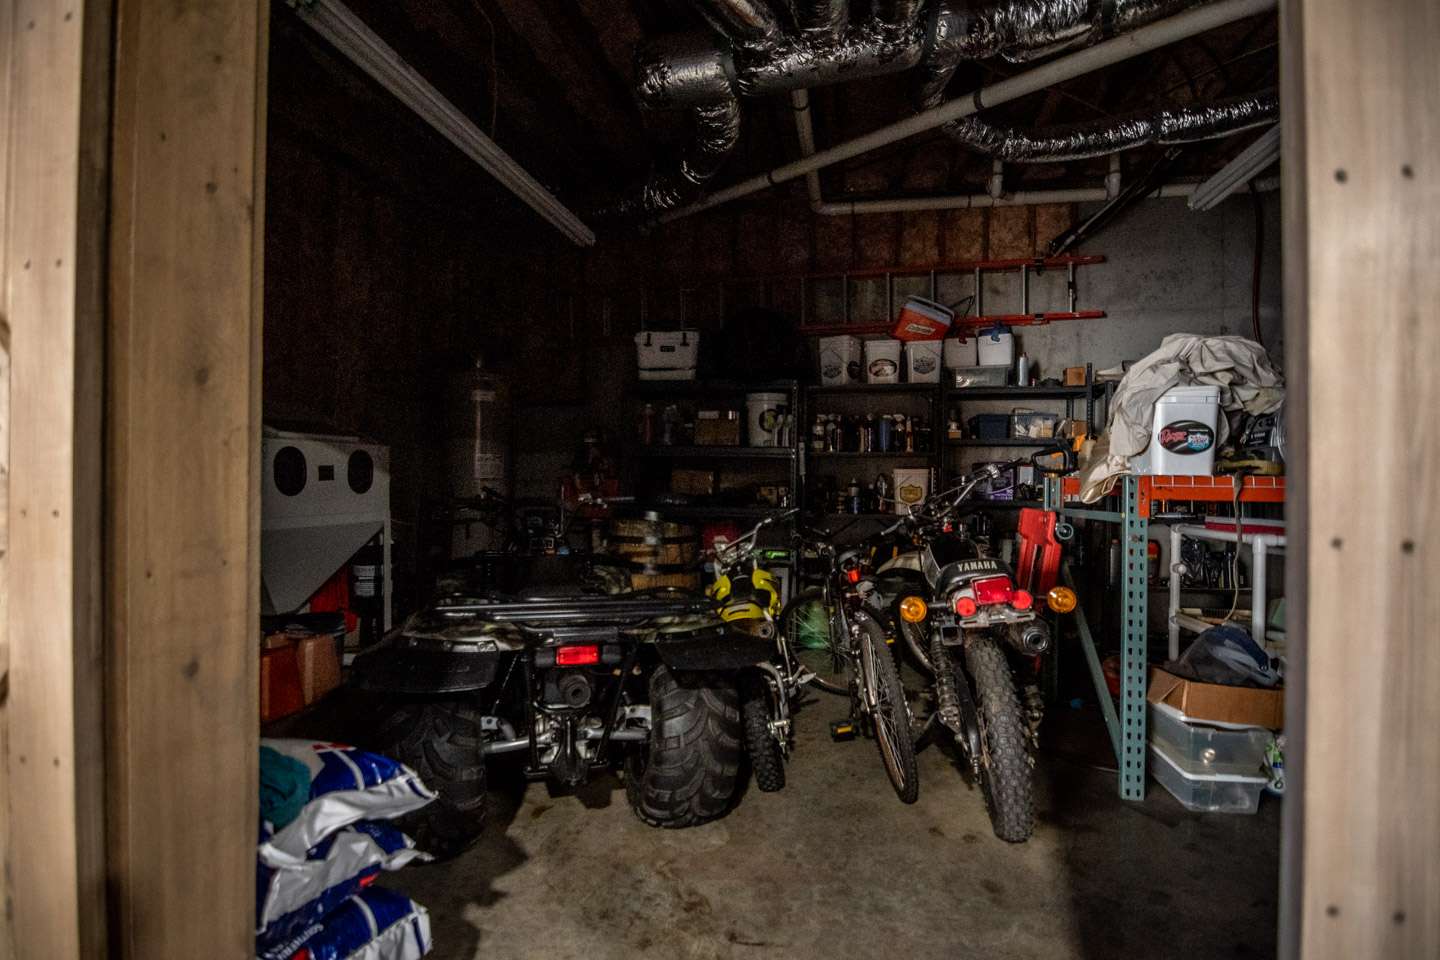 Next to his boat and toolbox is a miscellaneous room full of more tools, dirt bikes, a four-wheeler and everything in between. 